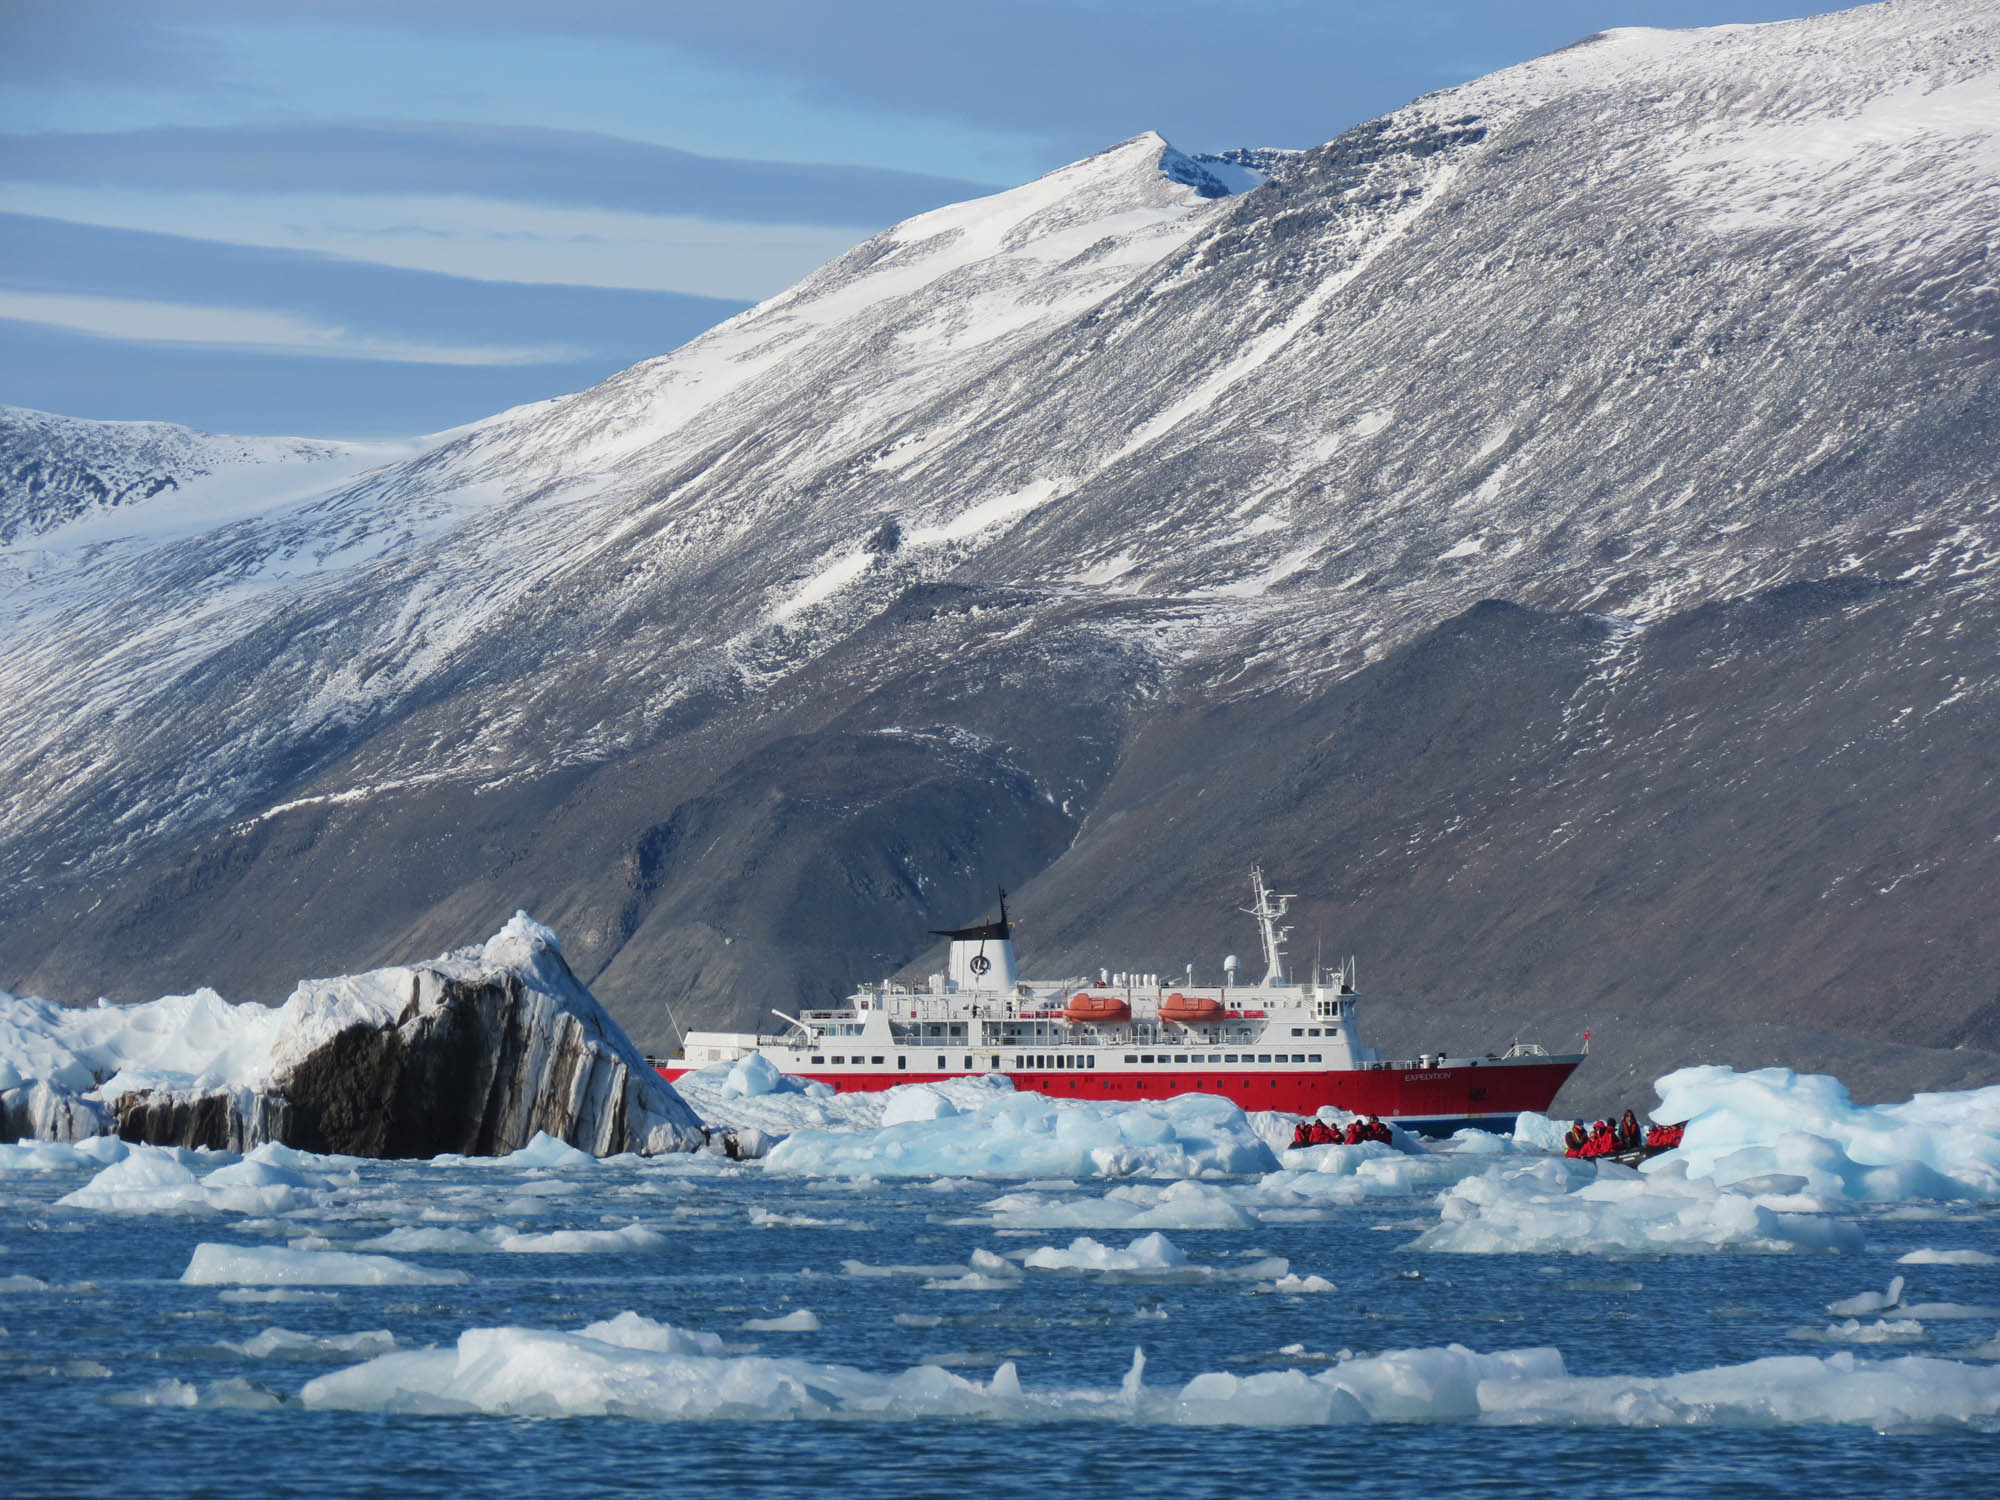 Ice Strengthened Expedition Ship in Monacobreen, Spitsbergen - Jen Squire